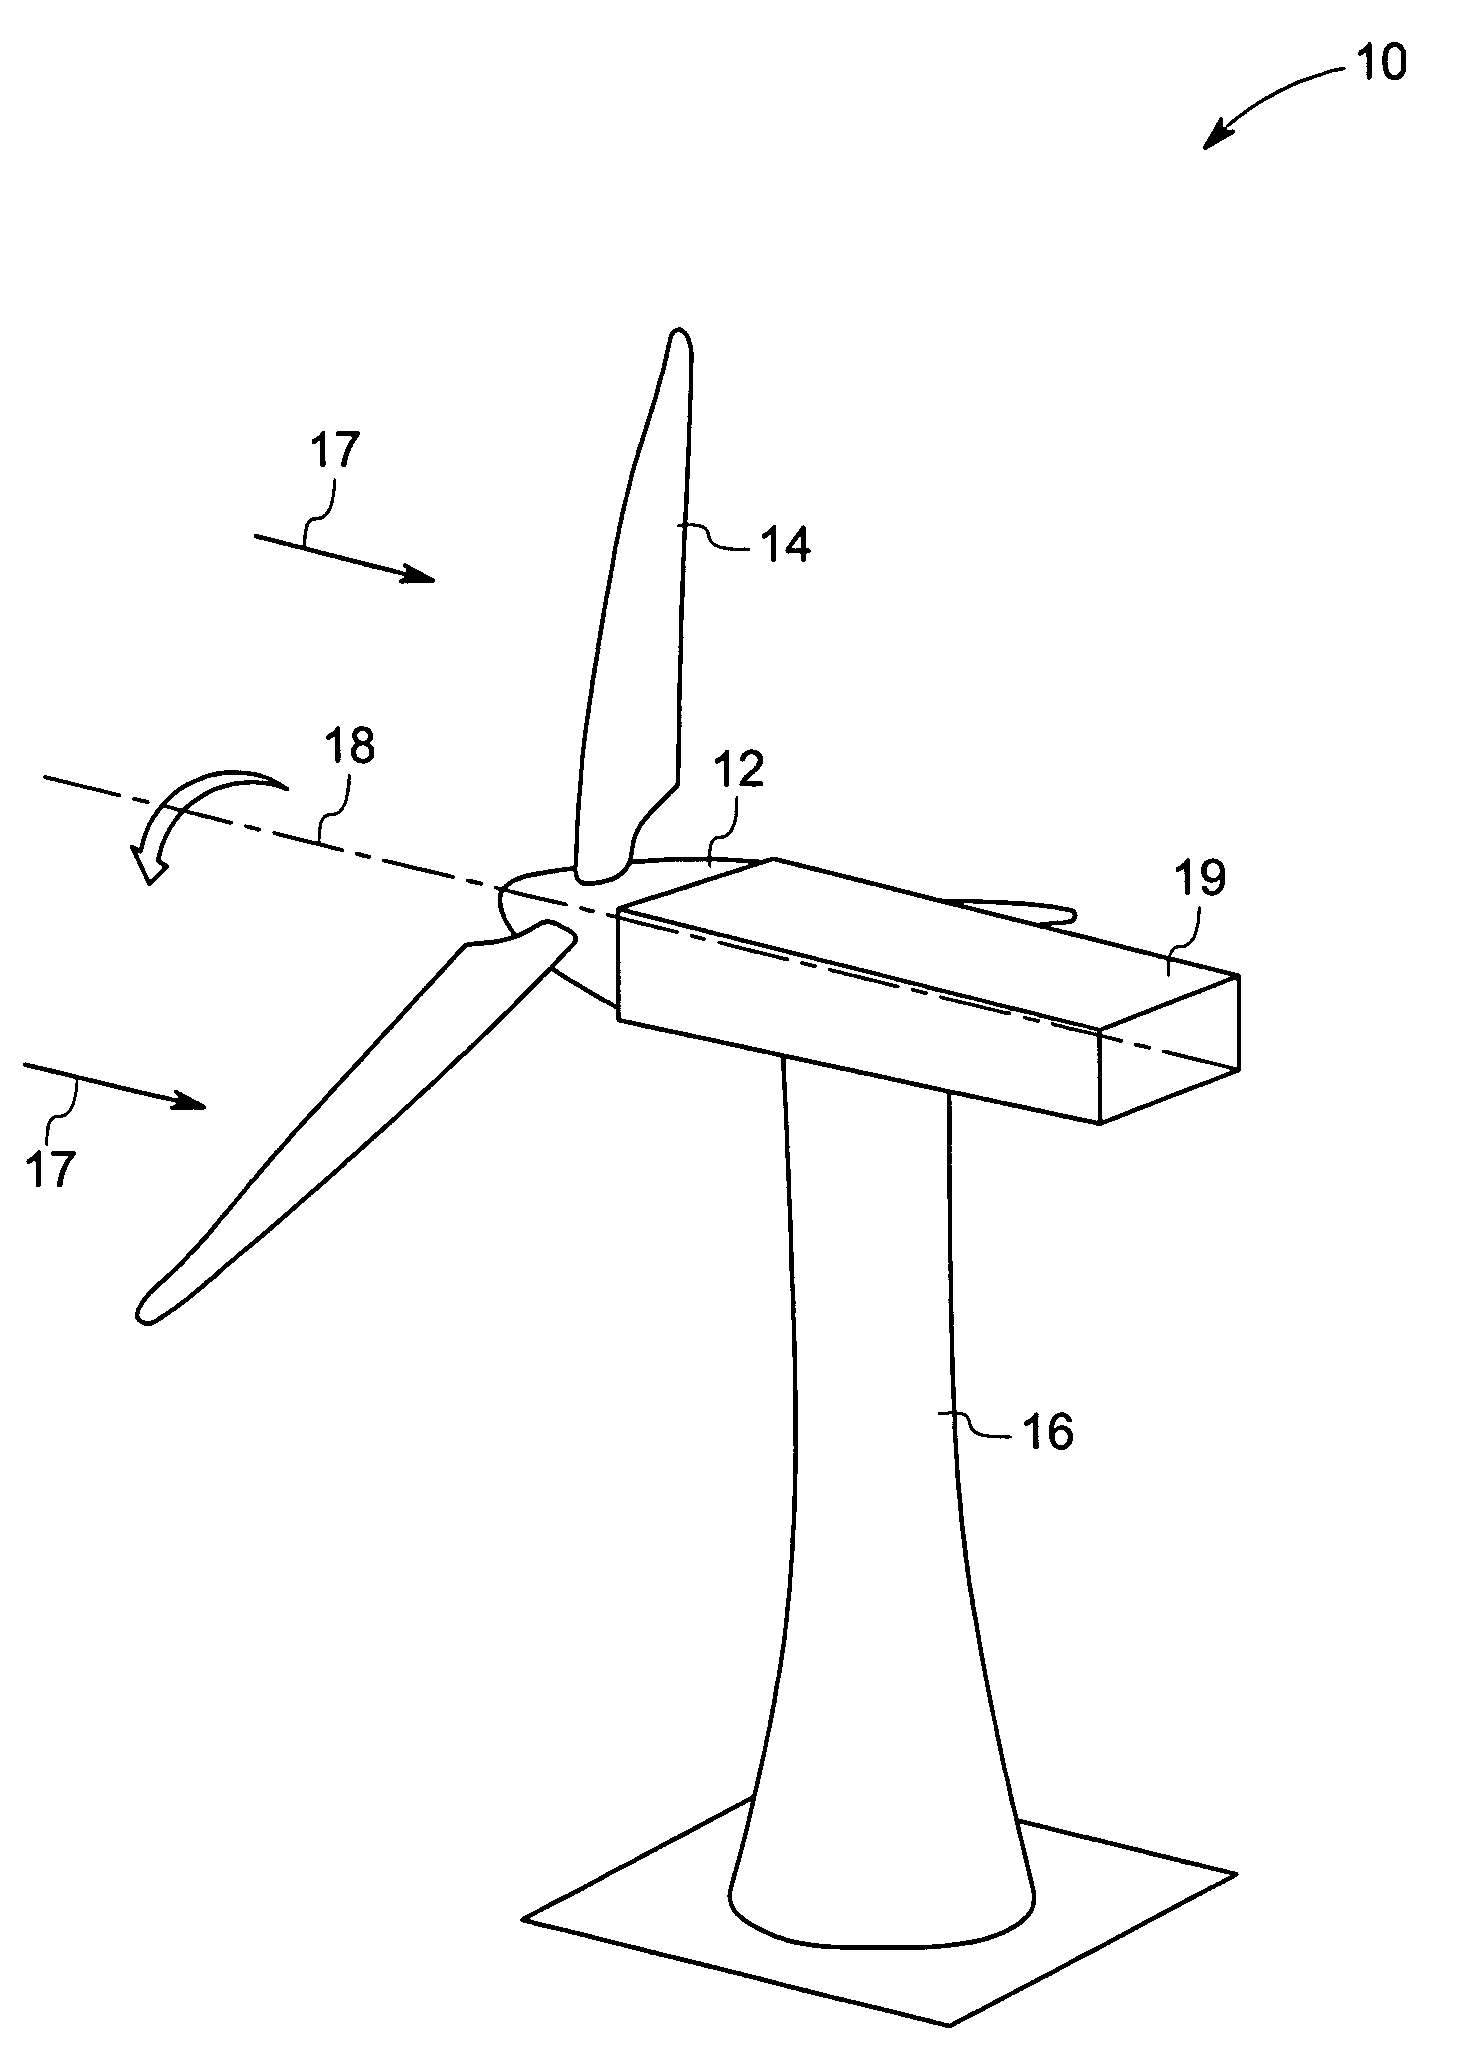 System and method for passive load attenuation in a wind turbine